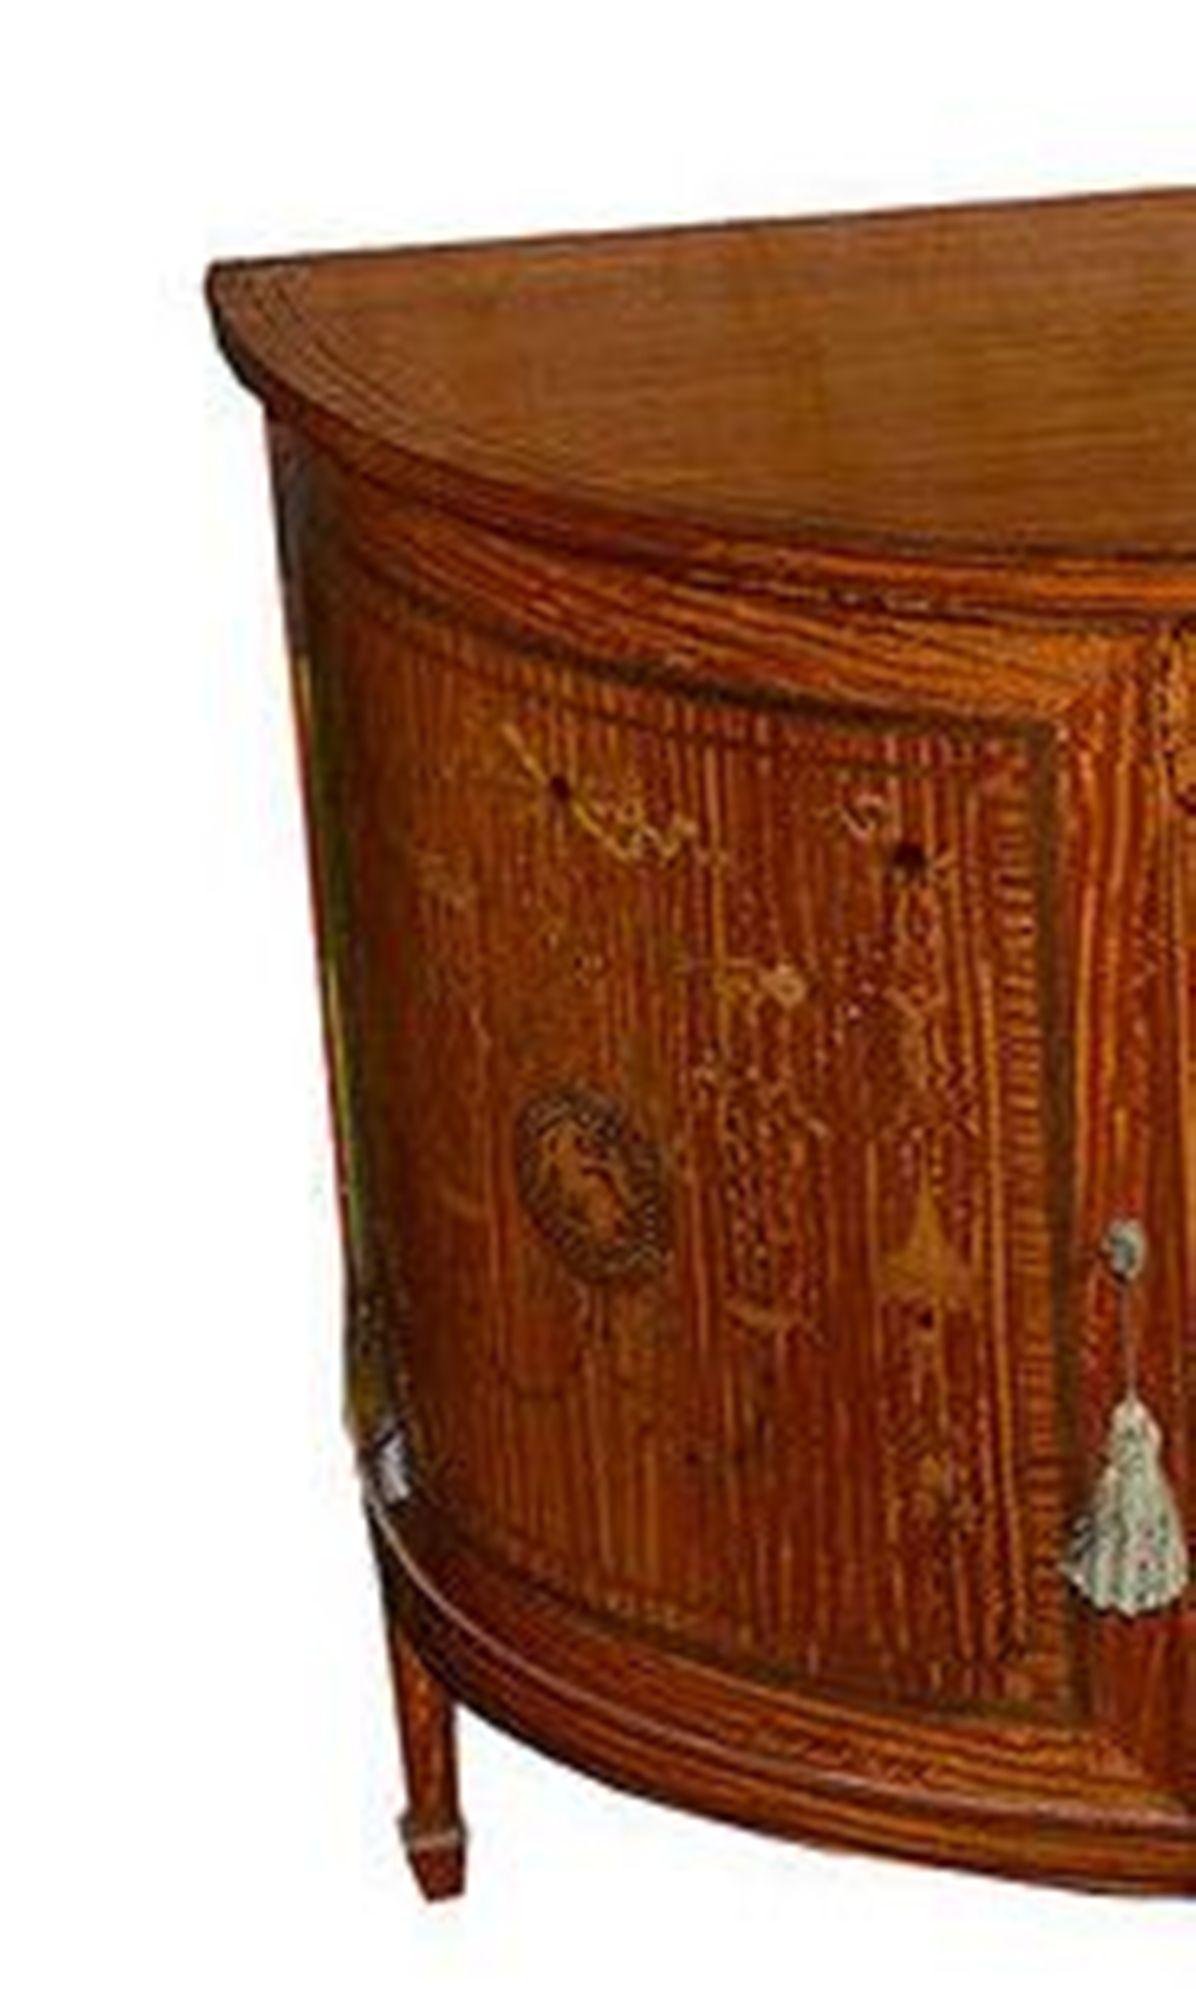 A French satinwood and marquetry inlaid D shaped sideboard of exceptionally fine quality.

The side and door panels and mahogany lined fronts, all with classical influenced inlays incorporating seated Grecian figures and urns and trailing